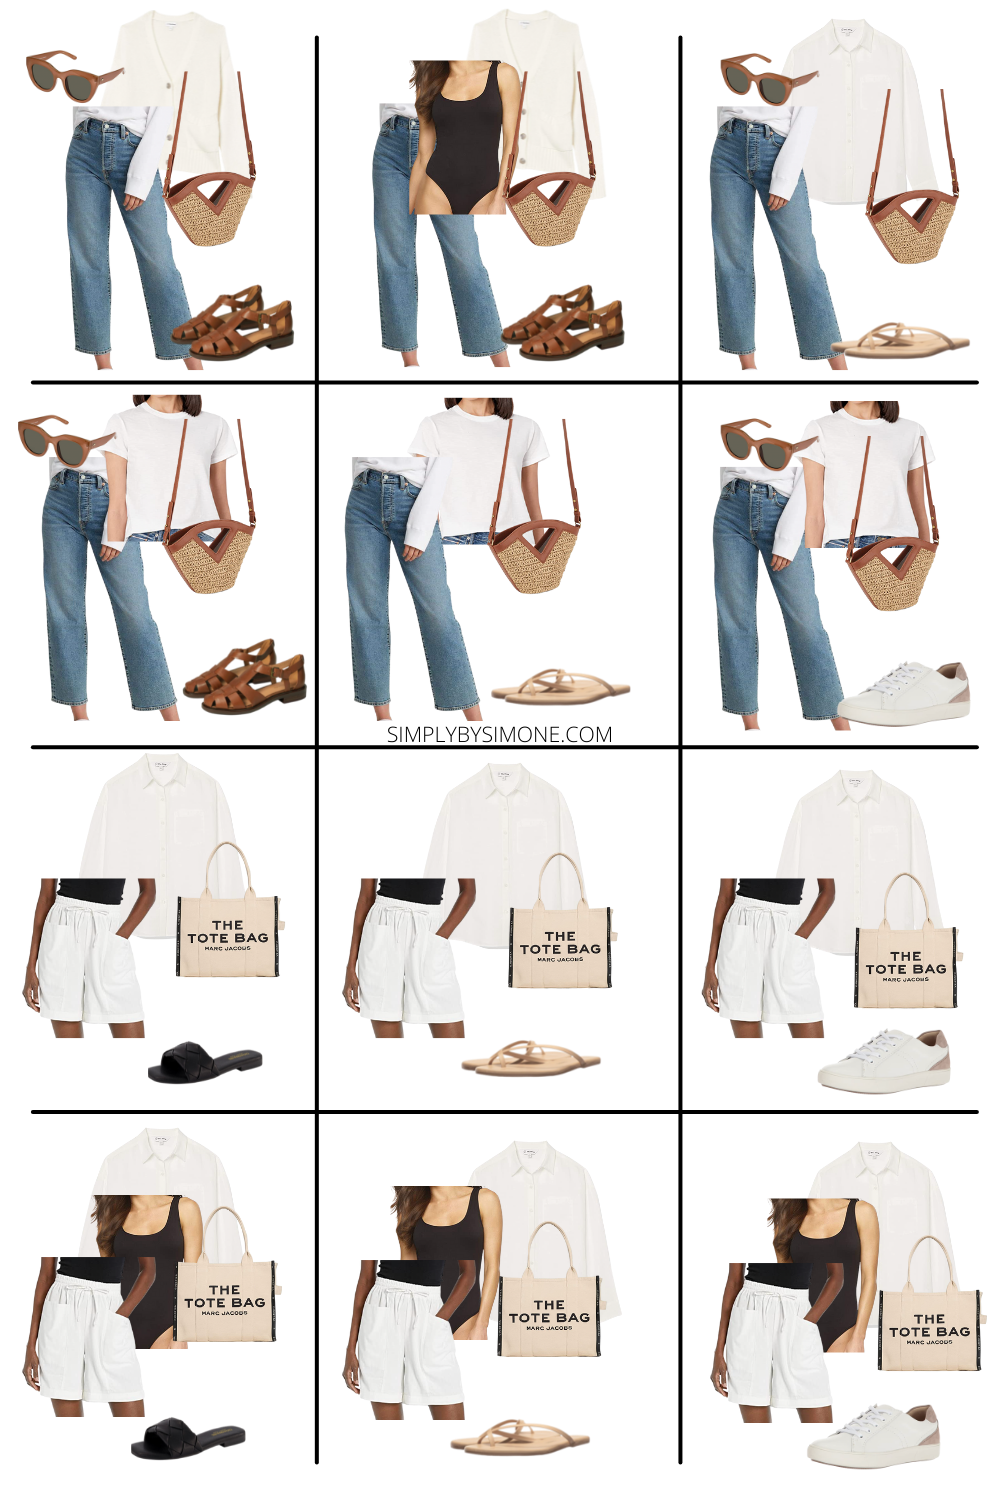 Affordable Amazon Pre-Fall Capsule Wardrobe | 15 Pieces, 48 Outfits | How to Build a Capsule Wardrobe | Amazon Fall Clothes | Outfit Inspiration | 48 Pre-Fall Weather Outfit Ideas | Fall Vacation Packing Guide | Amazon Pre-Fall Capsule Wardrobe - What To Wear This Fall 2022 | Parisian Outfit Ideas | Looks 13-24 | Simply by Simone